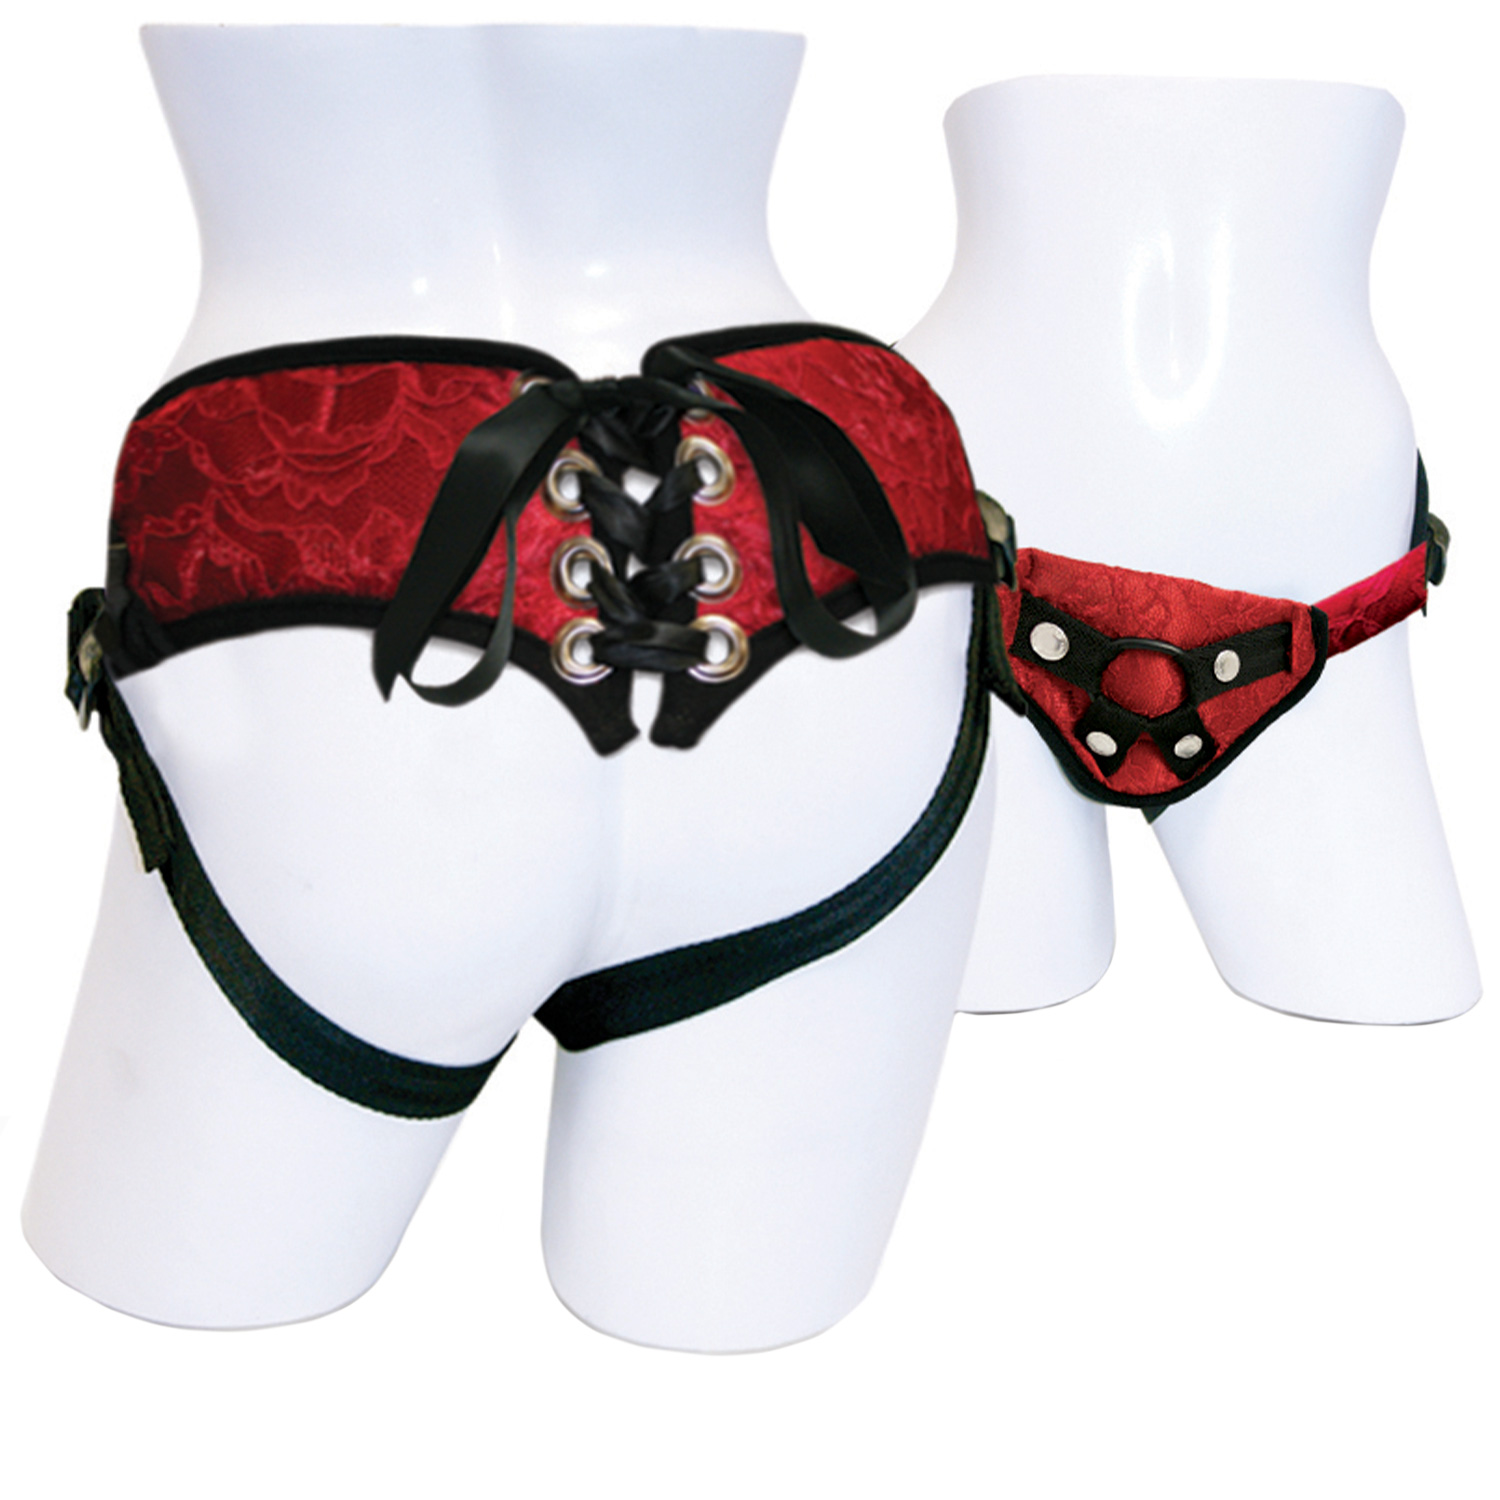 Sportsheets Red Lace Korset Strap-On Harness thumbnail